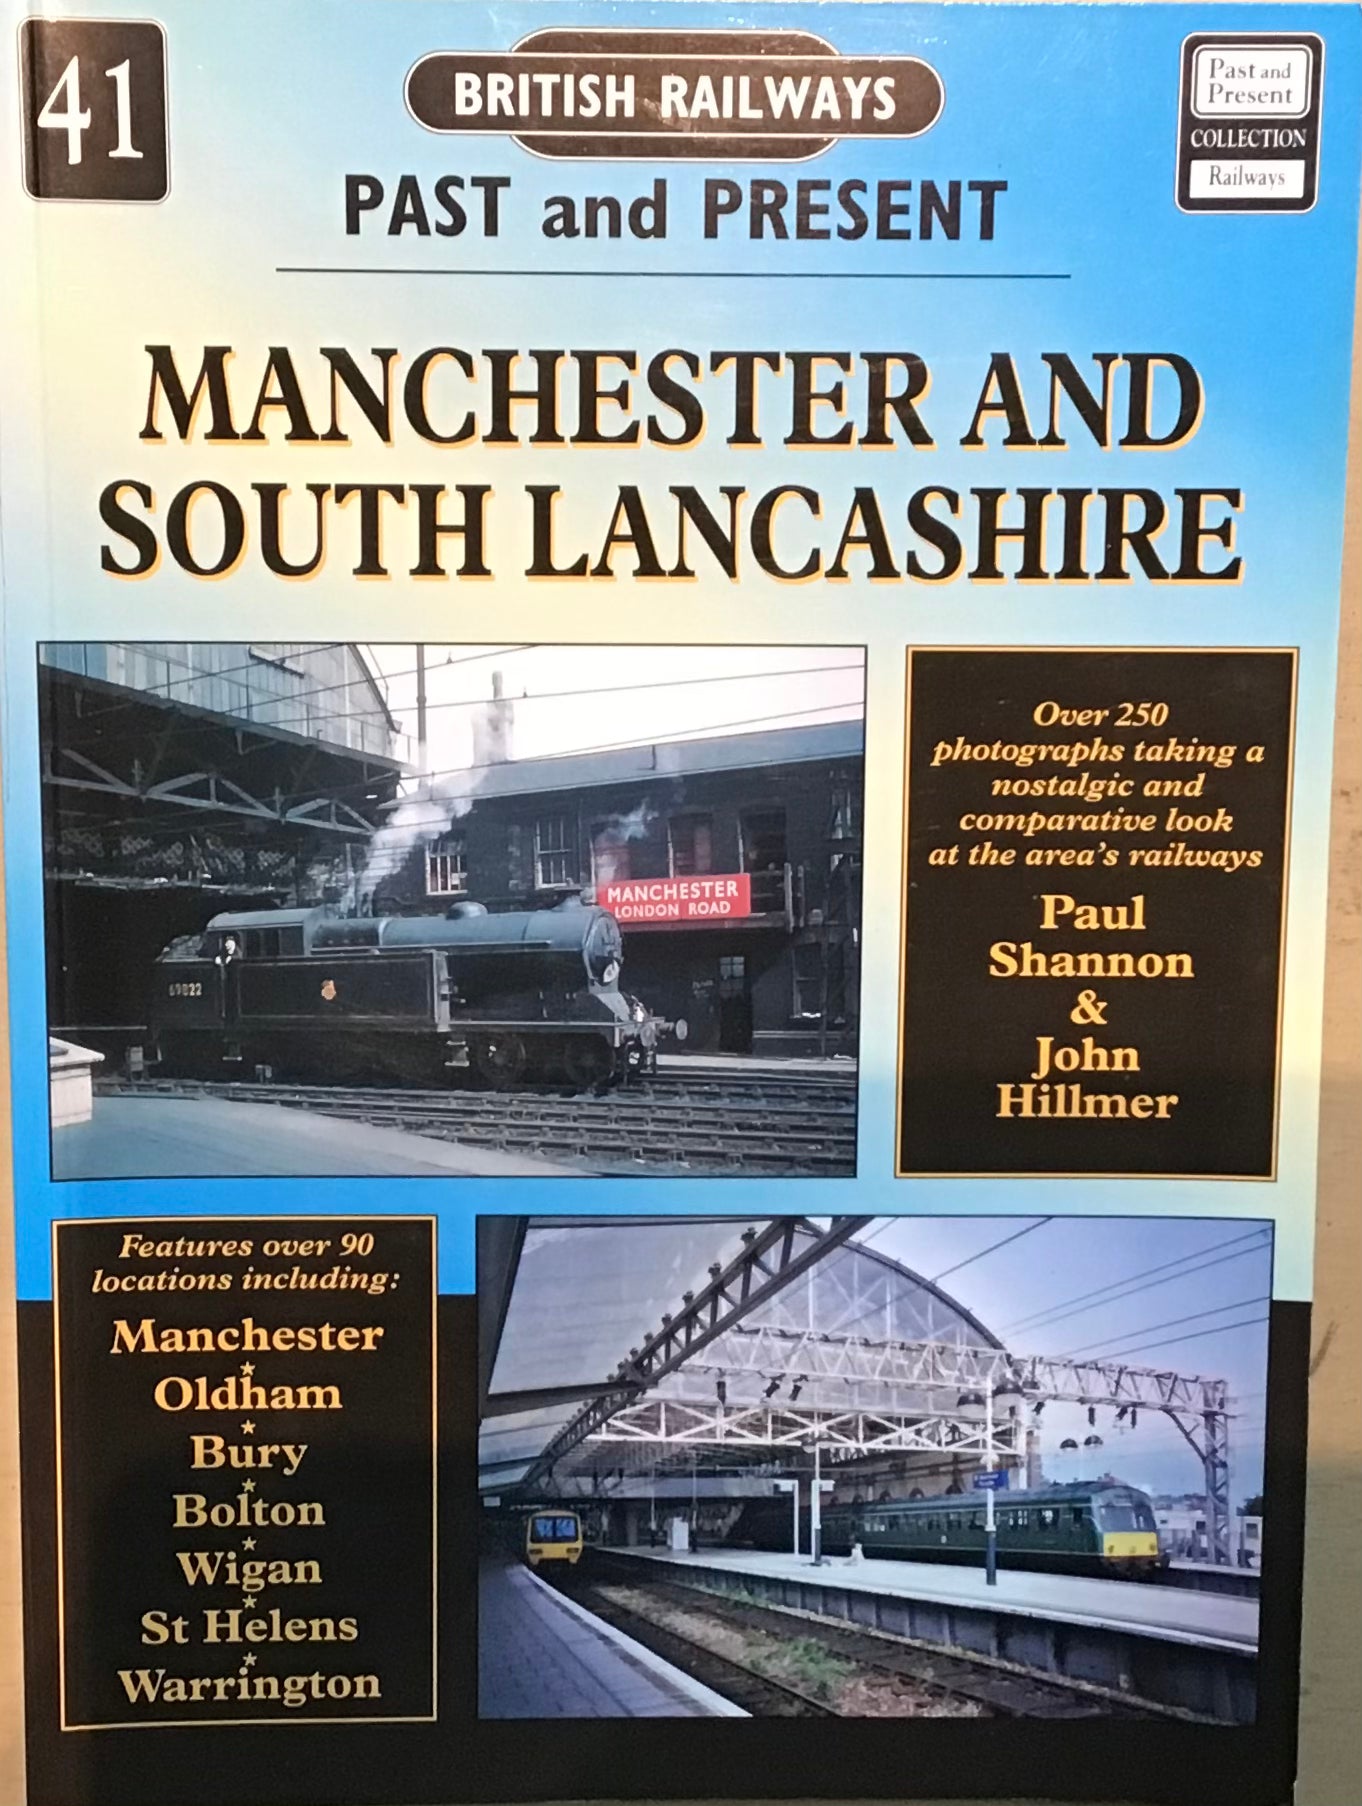 British Railways Past and Present: Manchester and South Lancashire - Paul Shannon & John Hillner - Chester Model Centre